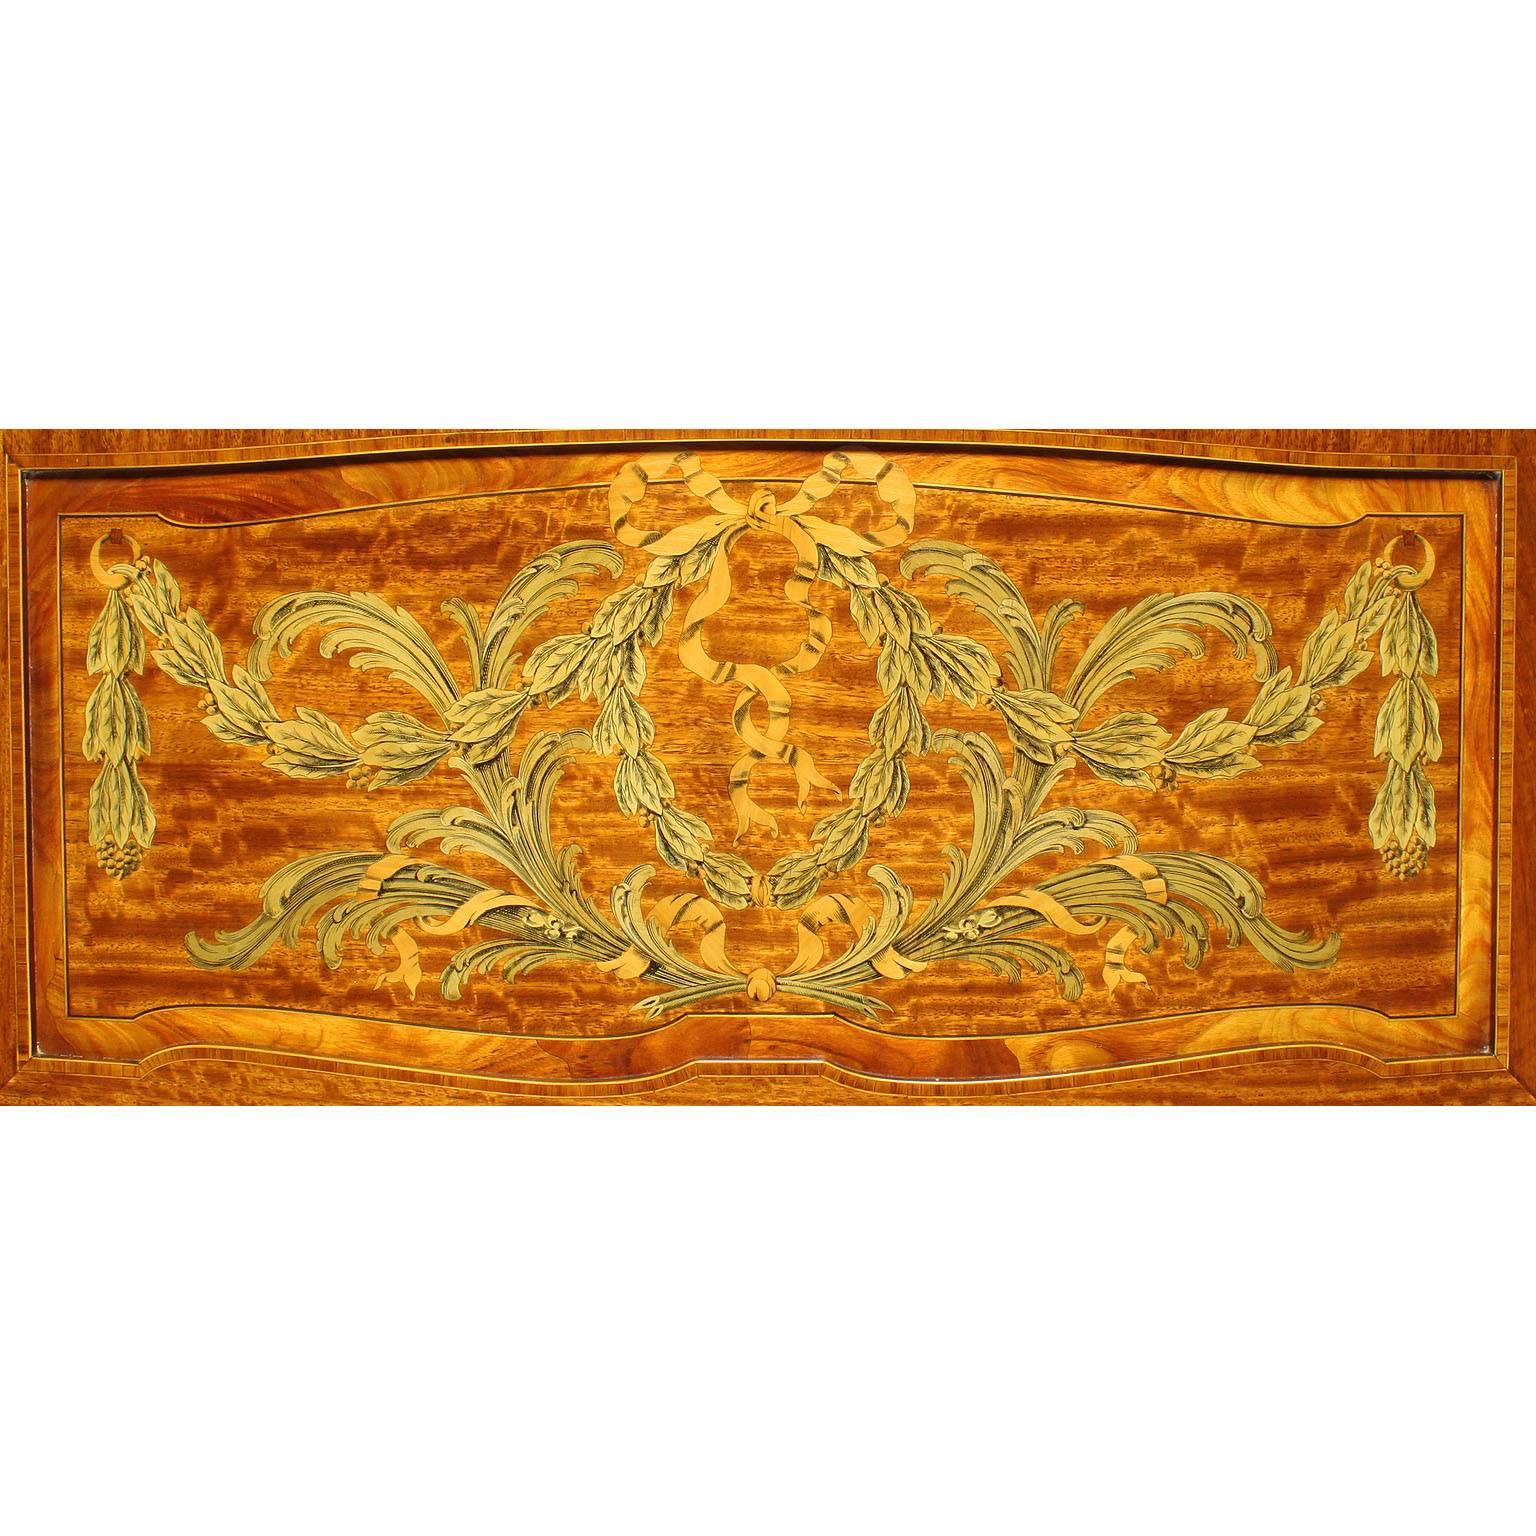 19th-20th Century Marquetry and Gilt-Bronze Mounted, François Linke Atrributed In Good Condition For Sale In Los Angeles, CA